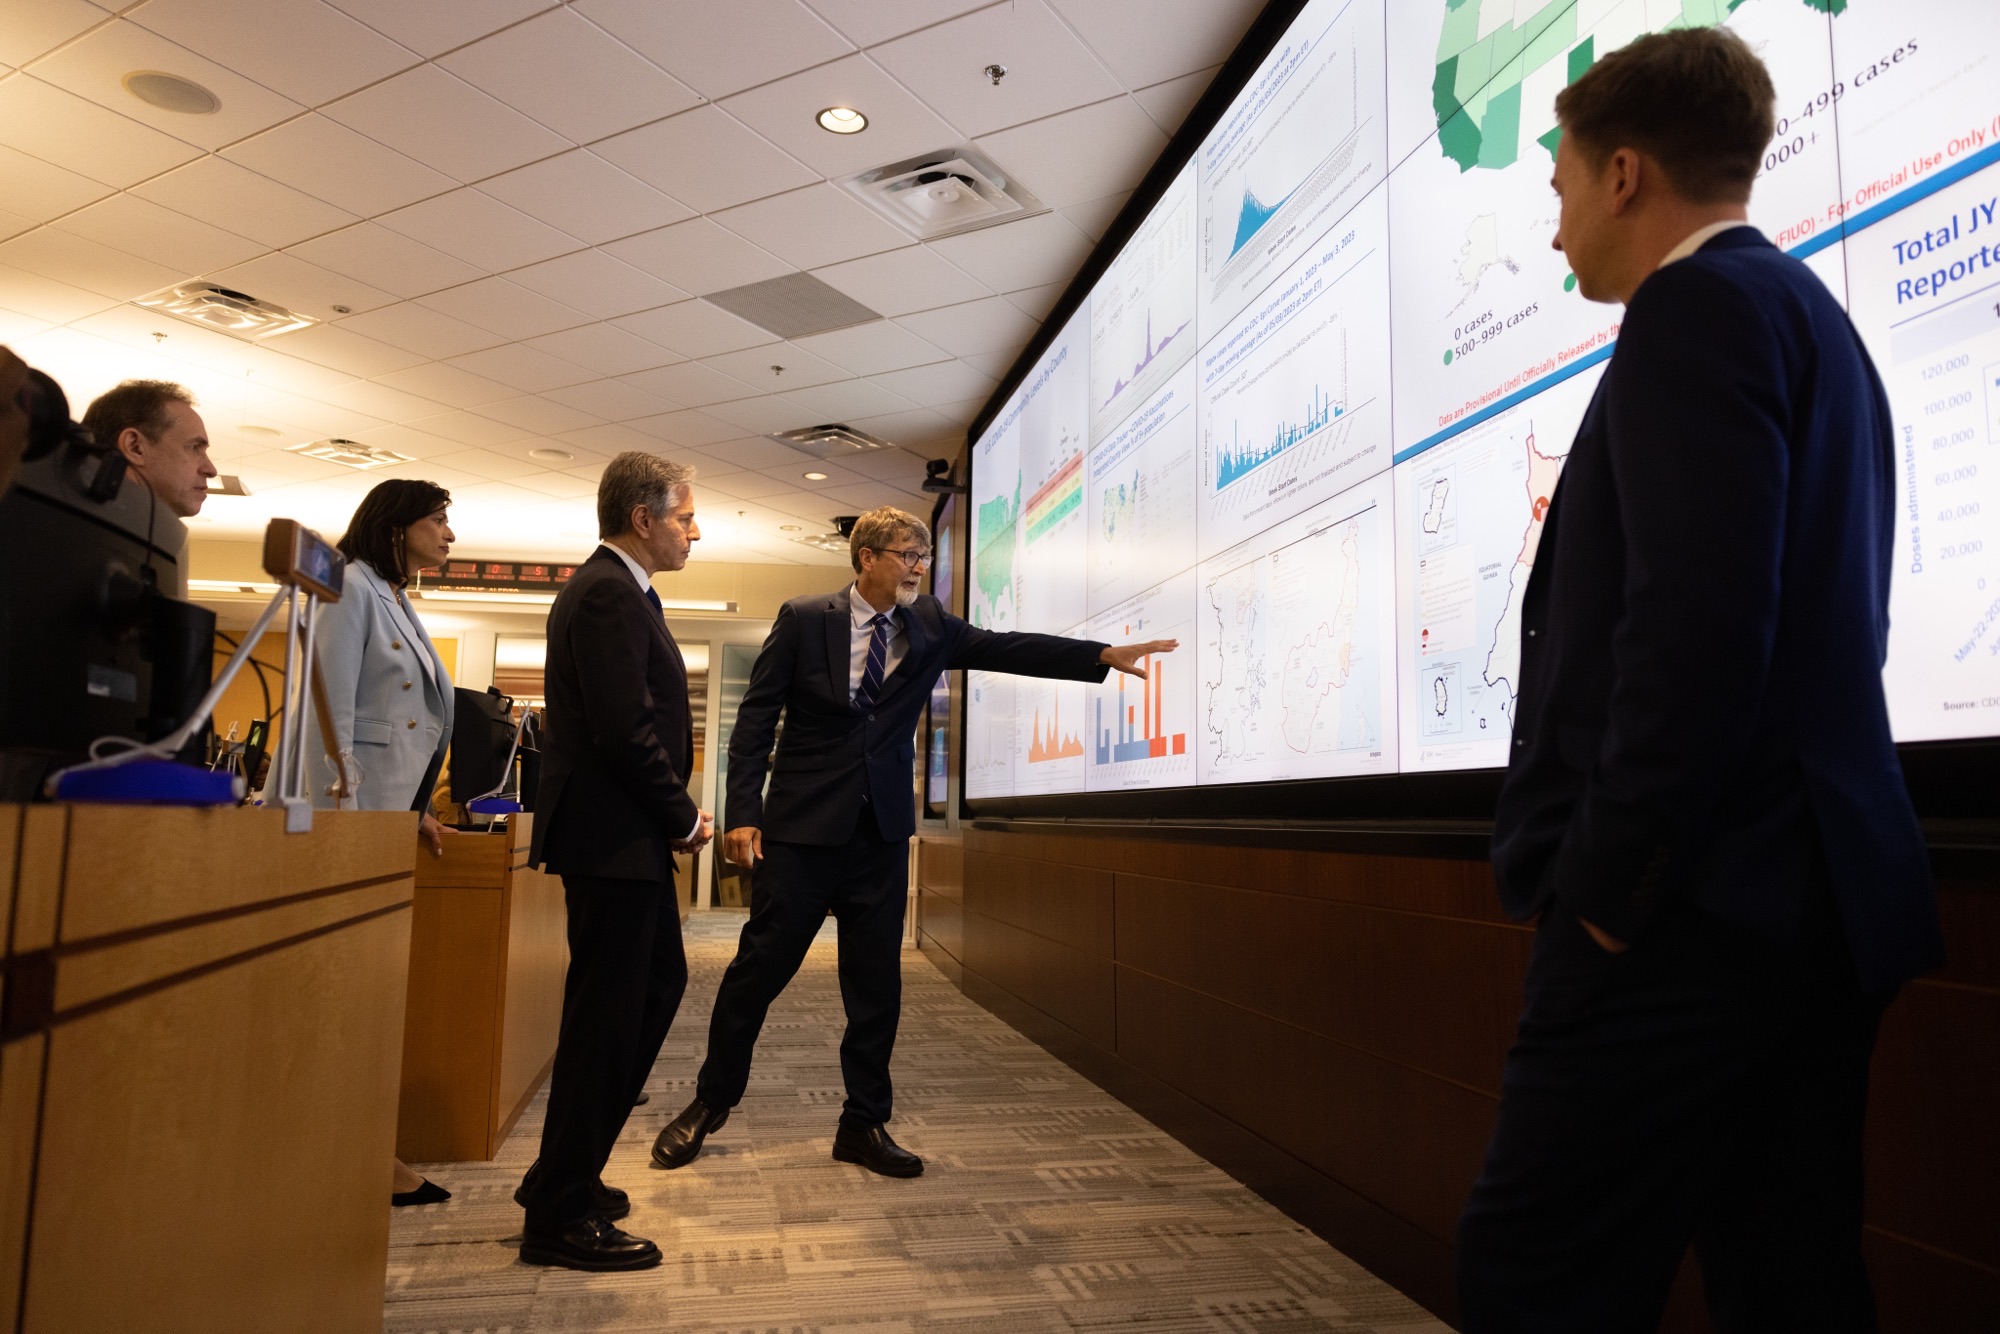 Secretary Blinken listens as a CDC official explains a graph on a screen.  The screen is part of a large wall made up of multiple screens, each displaying a different map or graph depicting health-related data in the United States.